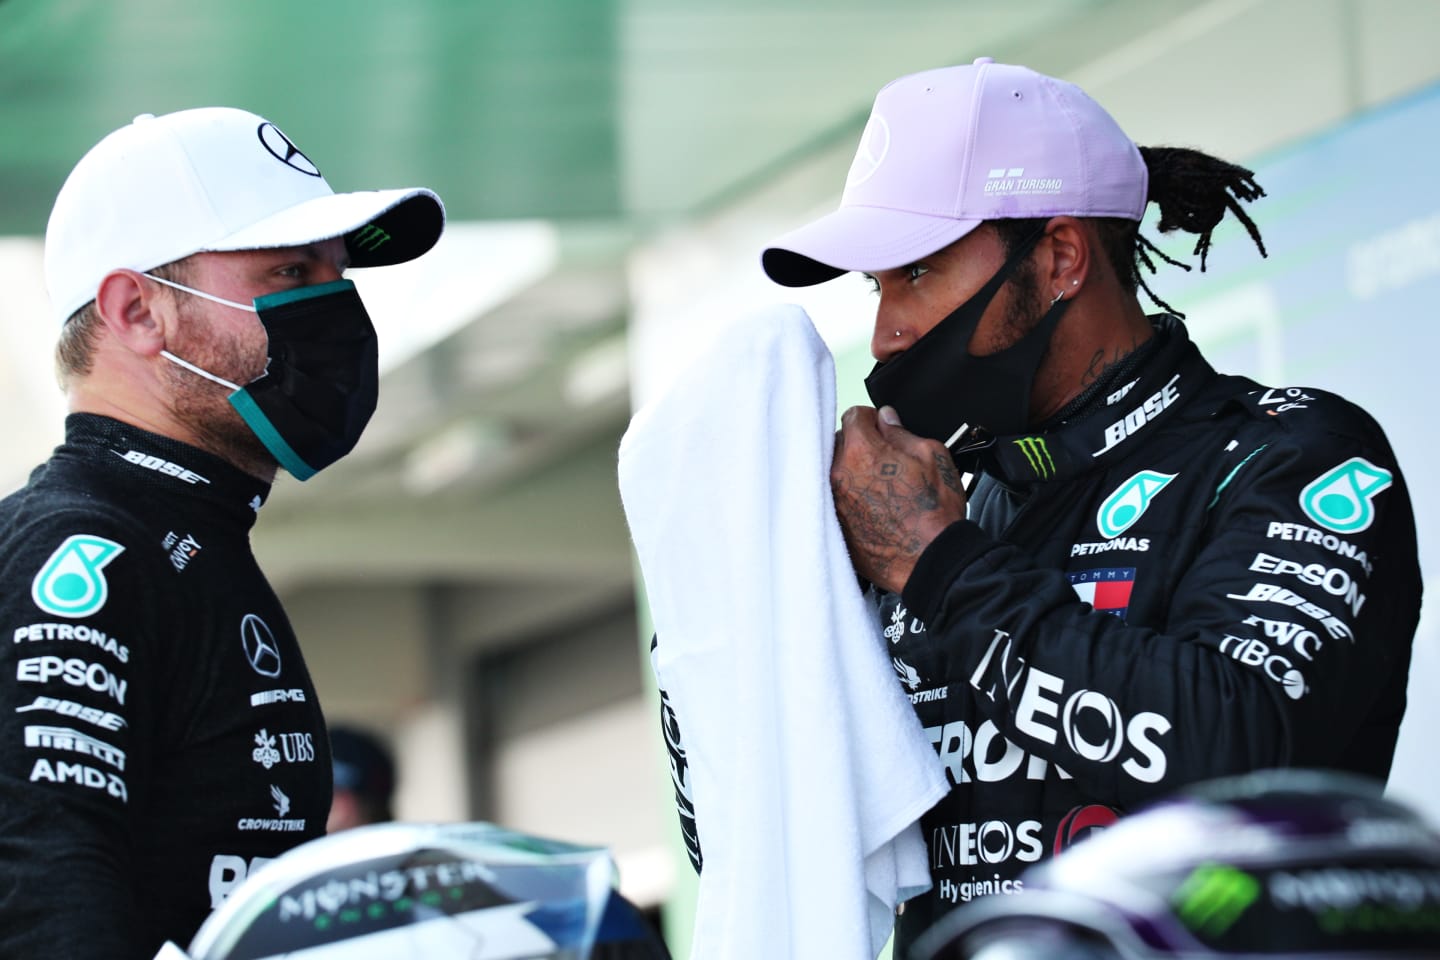 BARCELONA, SPAIN - AUGUST 15: Pole position qualifier Lewis Hamilton of Great Britain and Mercedes GP talks to second placed qualifier Valtteri Bottas of Finland and Mercedes GP during qualifying for the F1 Grand Prix of Spain at Circuit de Barcelona-Catalunya on August 15, 2020 in Barcelona, Spain. (Photo by Albert Gea/Pool via Getty Images)